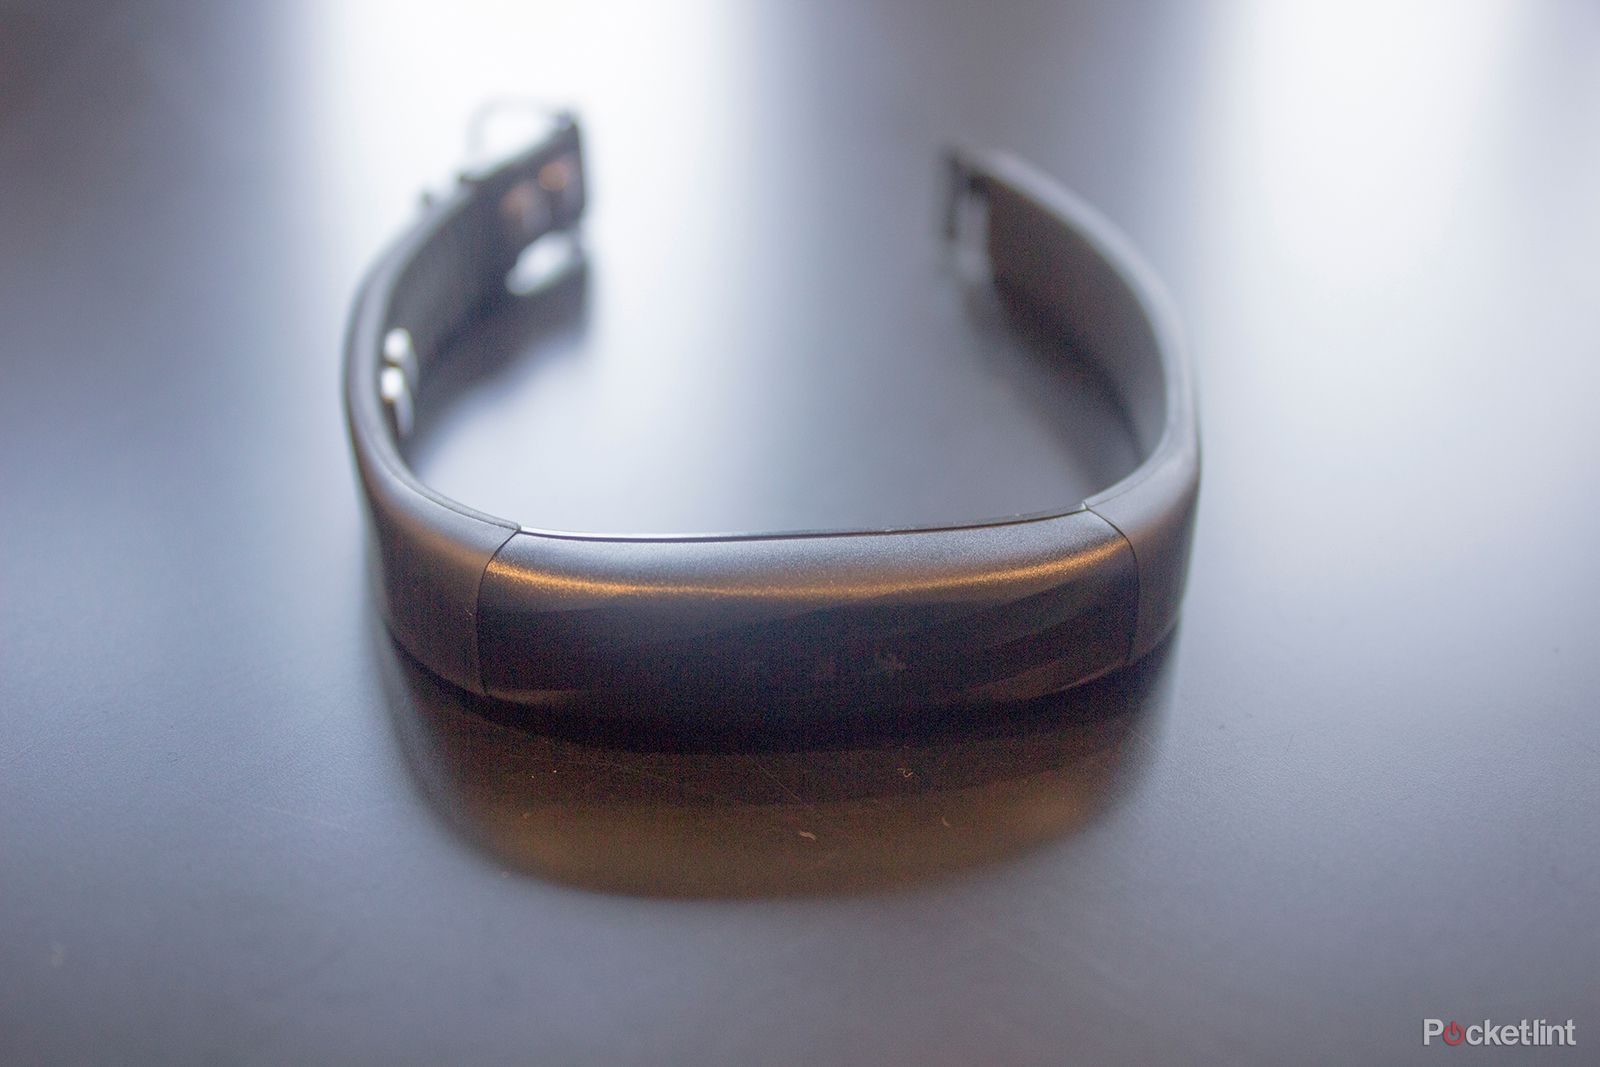 jawbone up3 with hr monitor plus budget up move model unveiled image 4